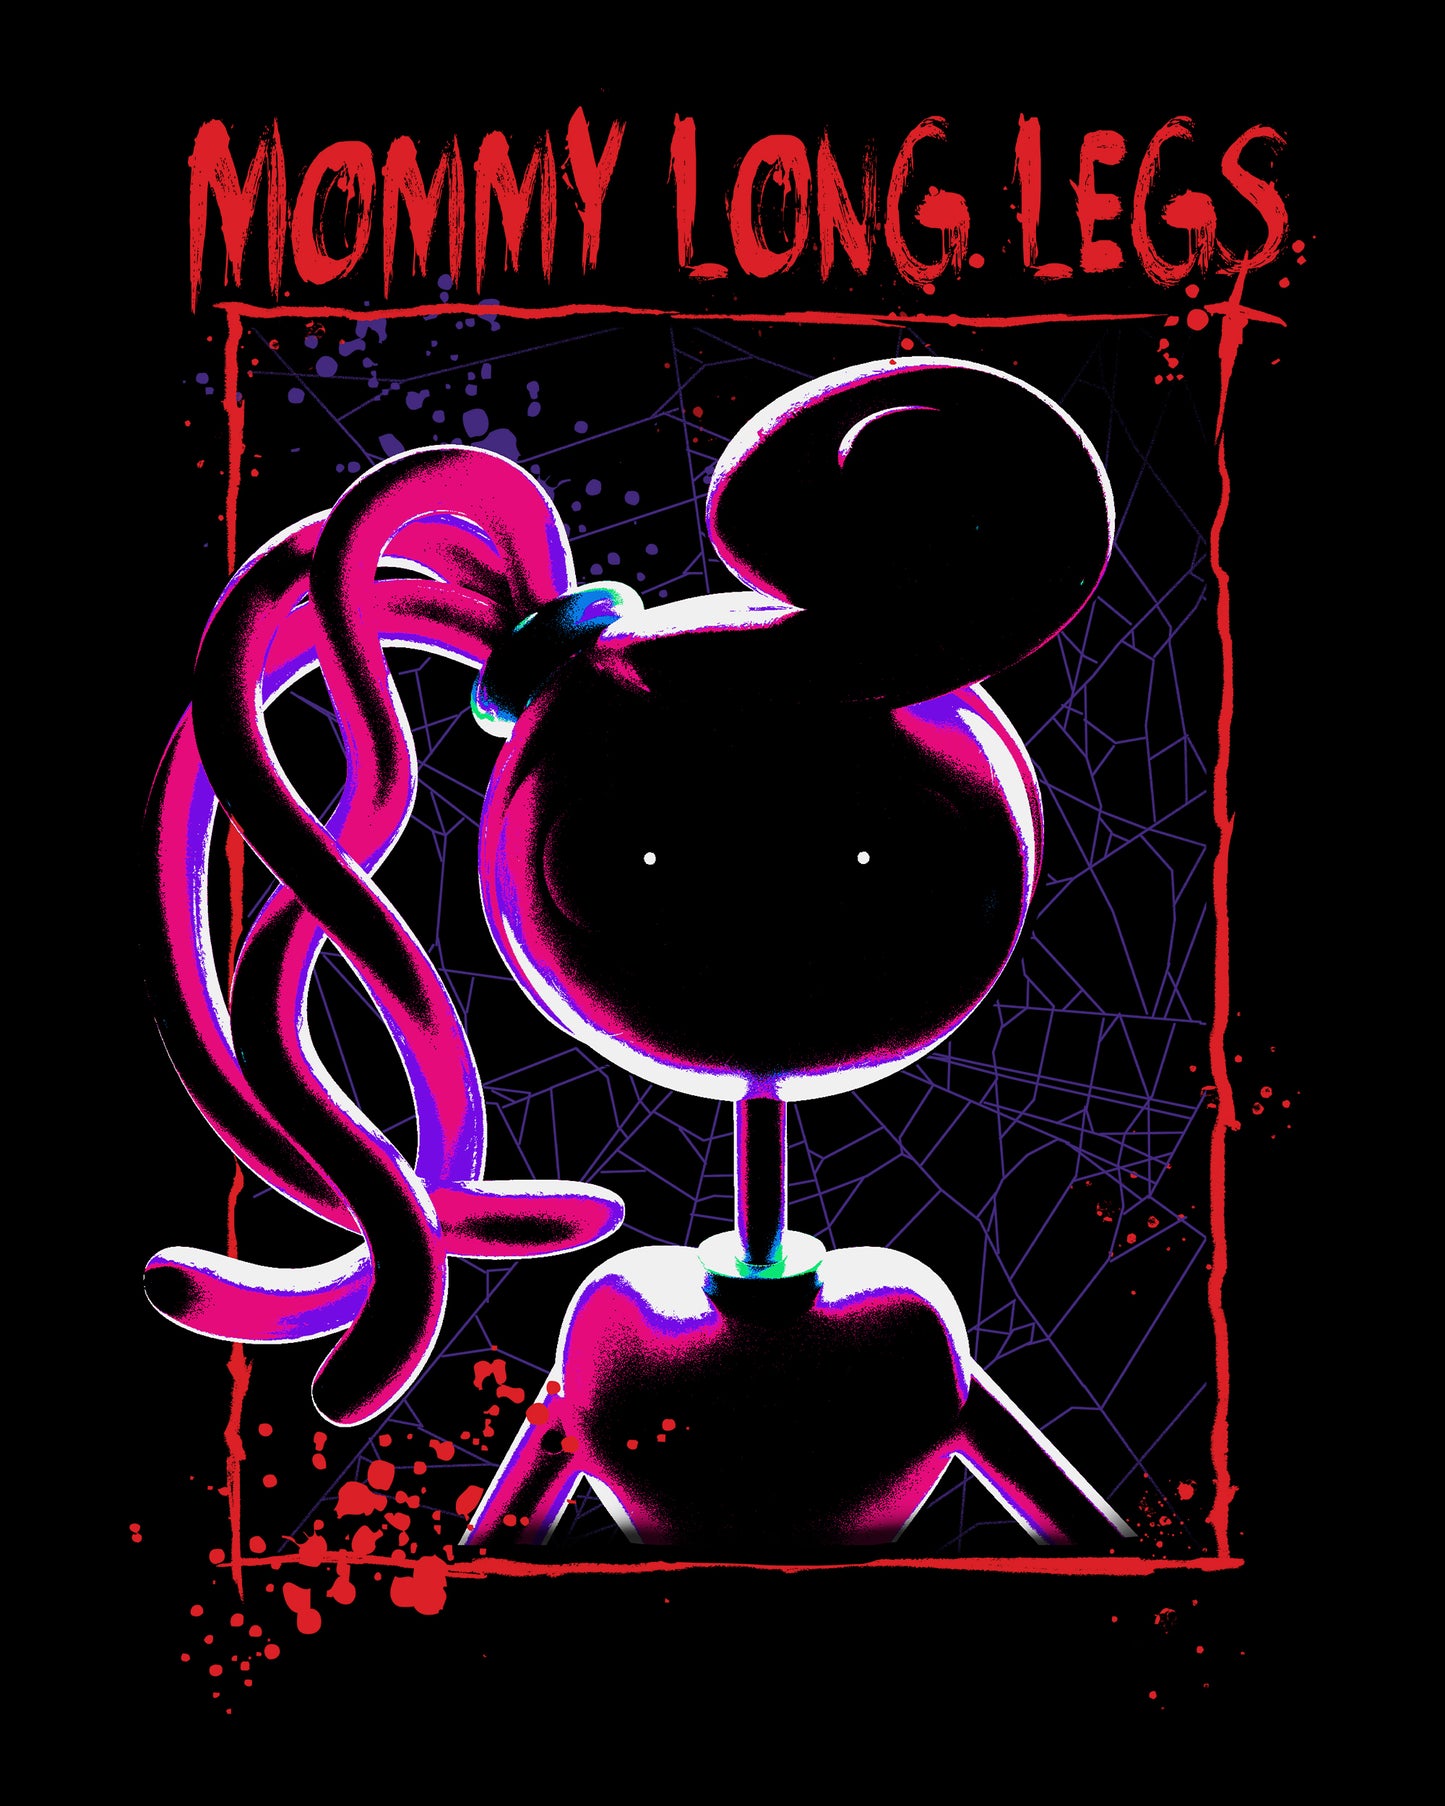 image on shirt: mommy longlegs face dark to see only white dots. background is spiderwebs. text: mommy longlegs